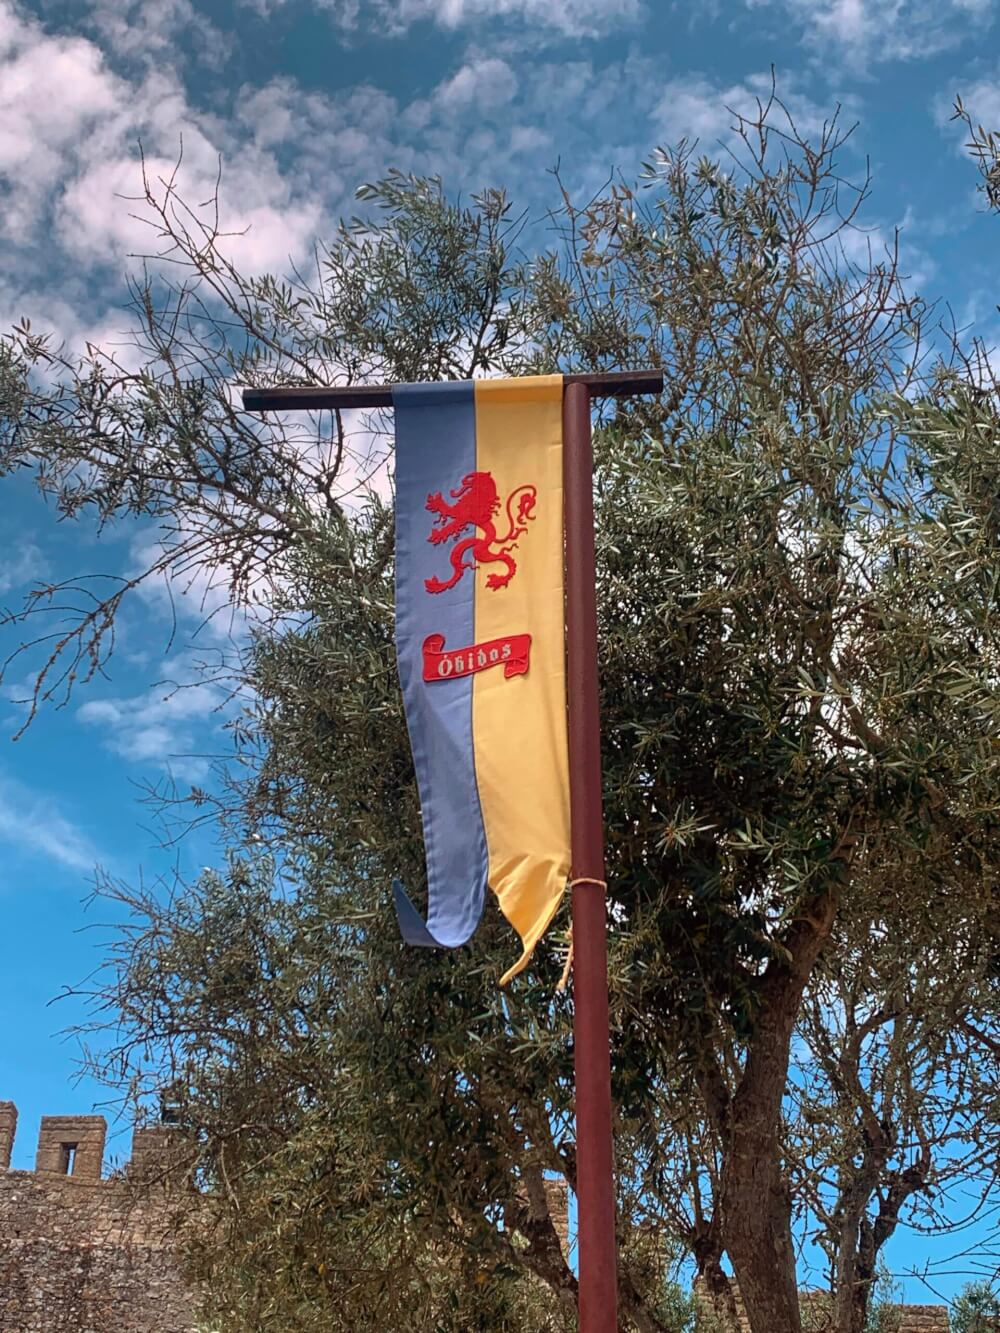 An "Obidos" banner with the city symbol of a mythical creature flying in the wind. 